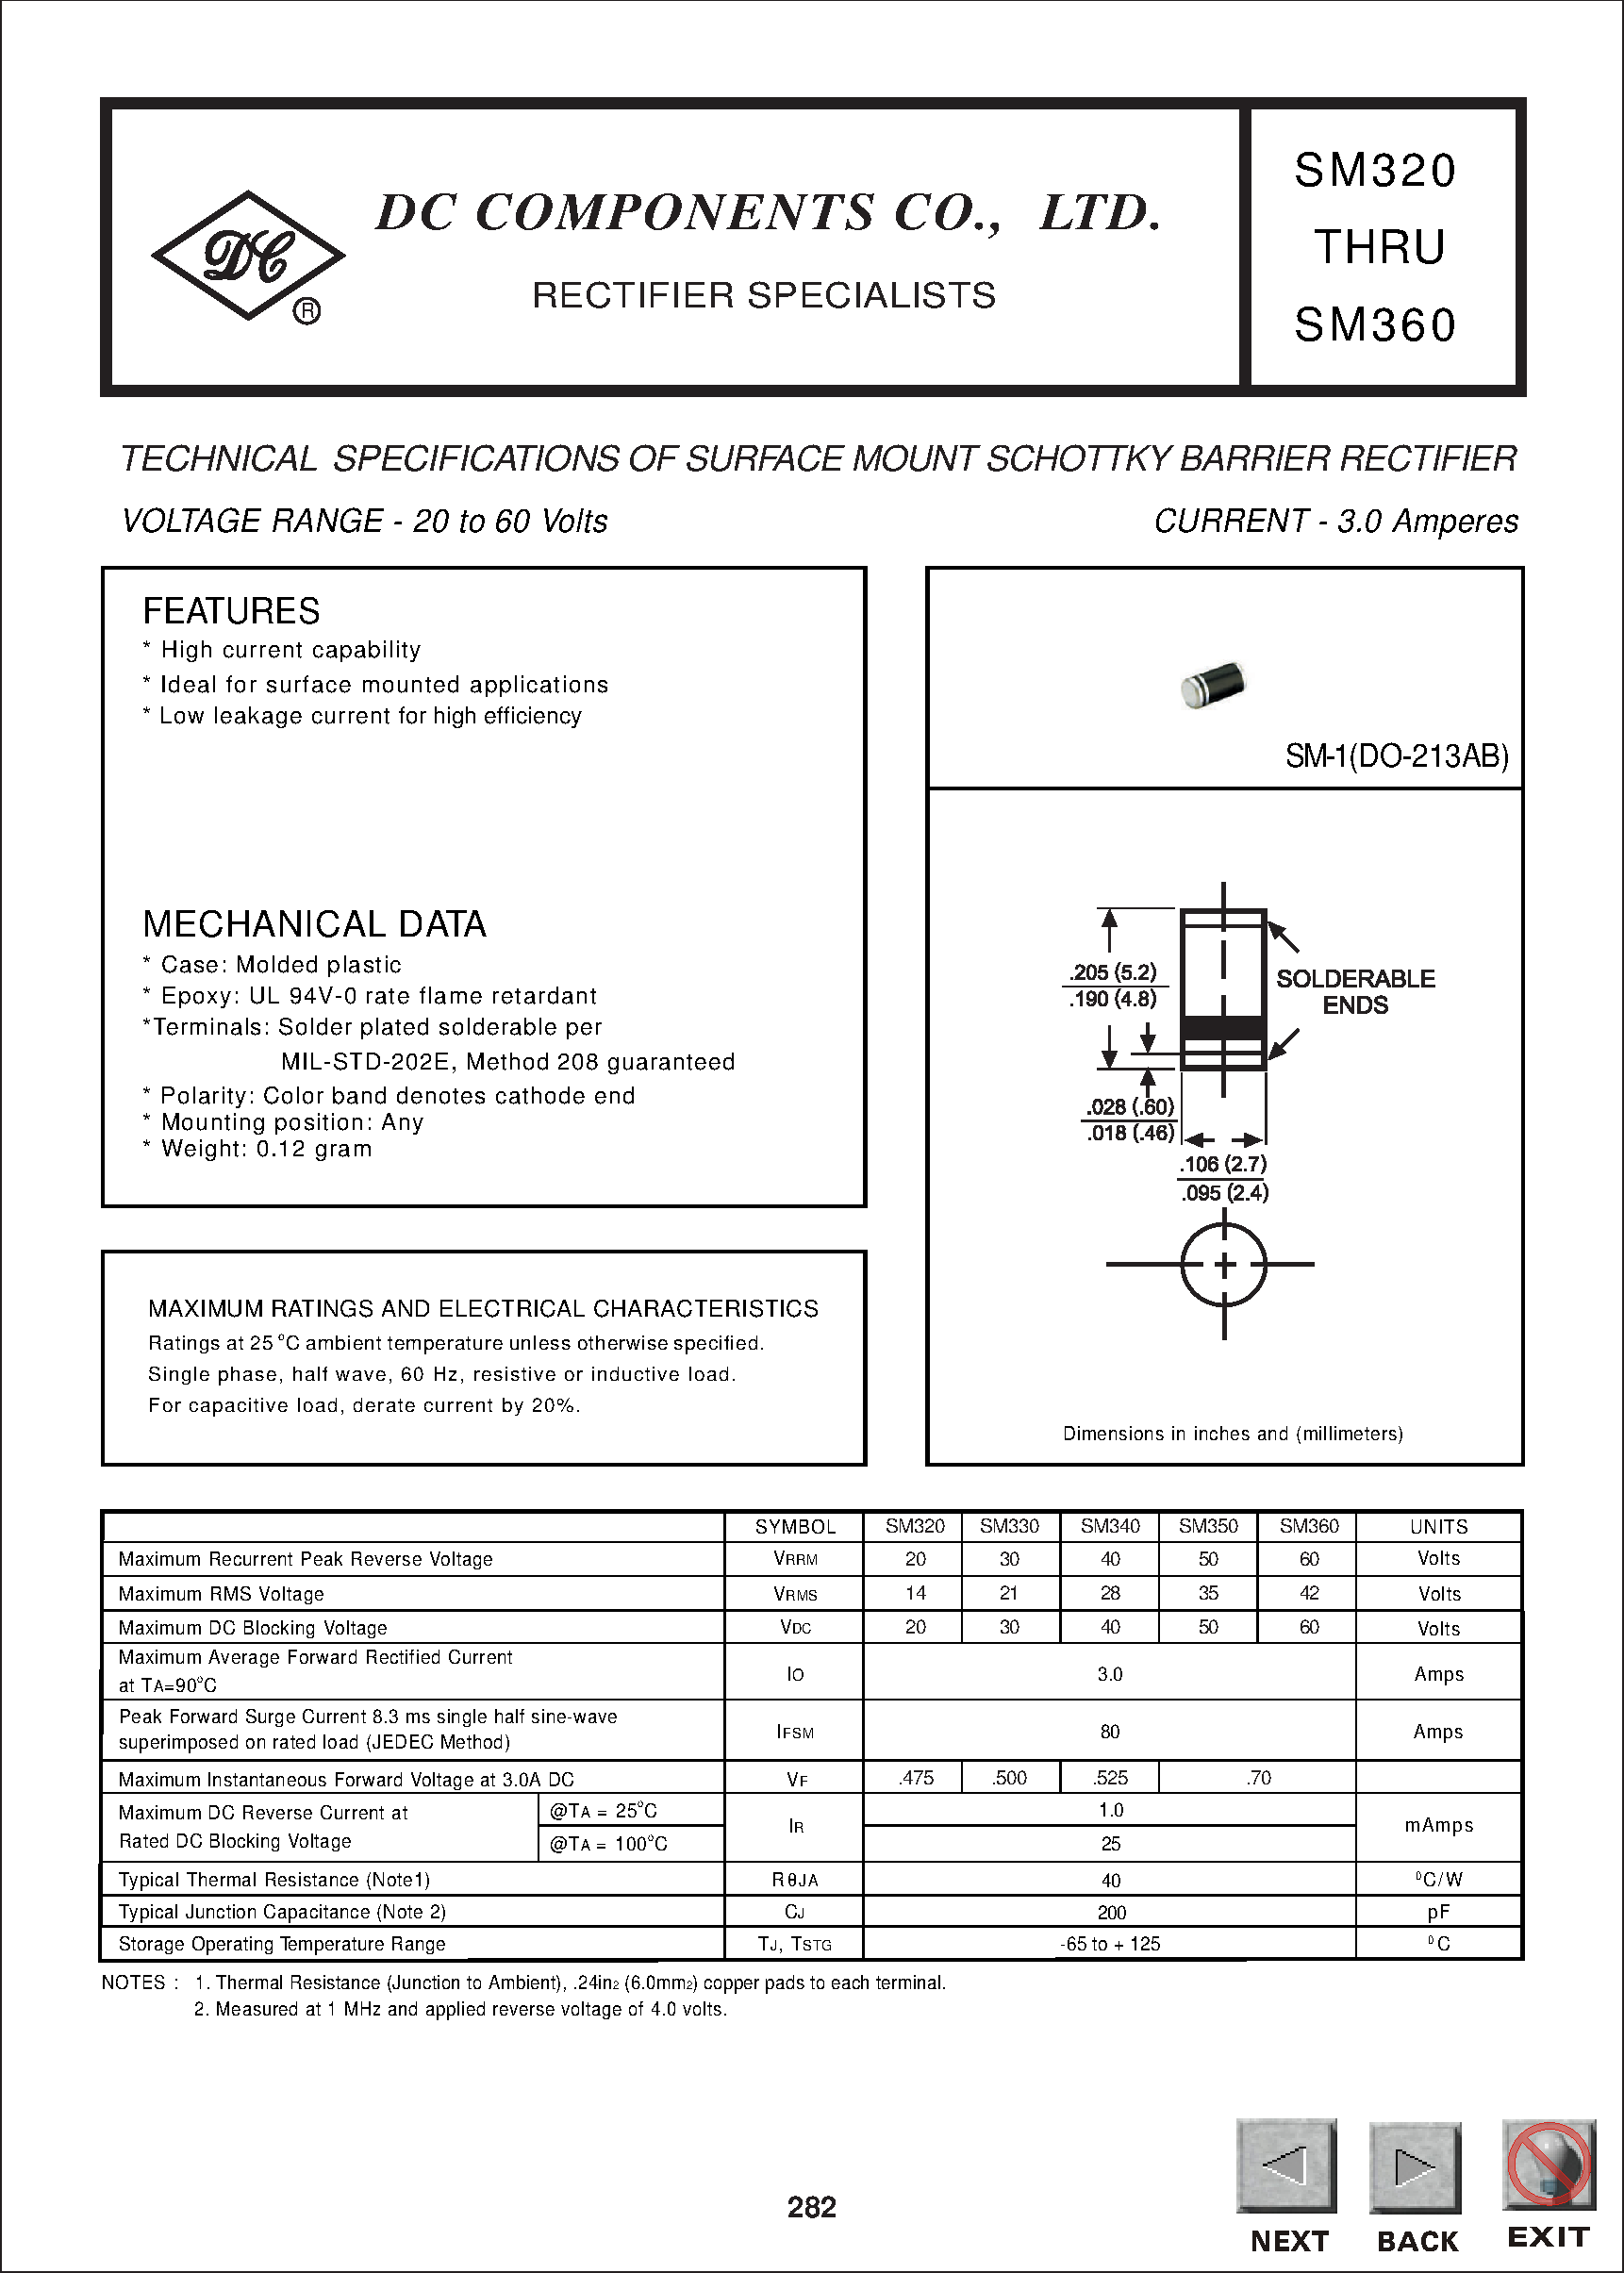 Даташит SM330 - TECHNICAL SPECIFICATIONS OF SURFACE MOUNT SCHOTTKY BARRIER RECTIFIER страница 1